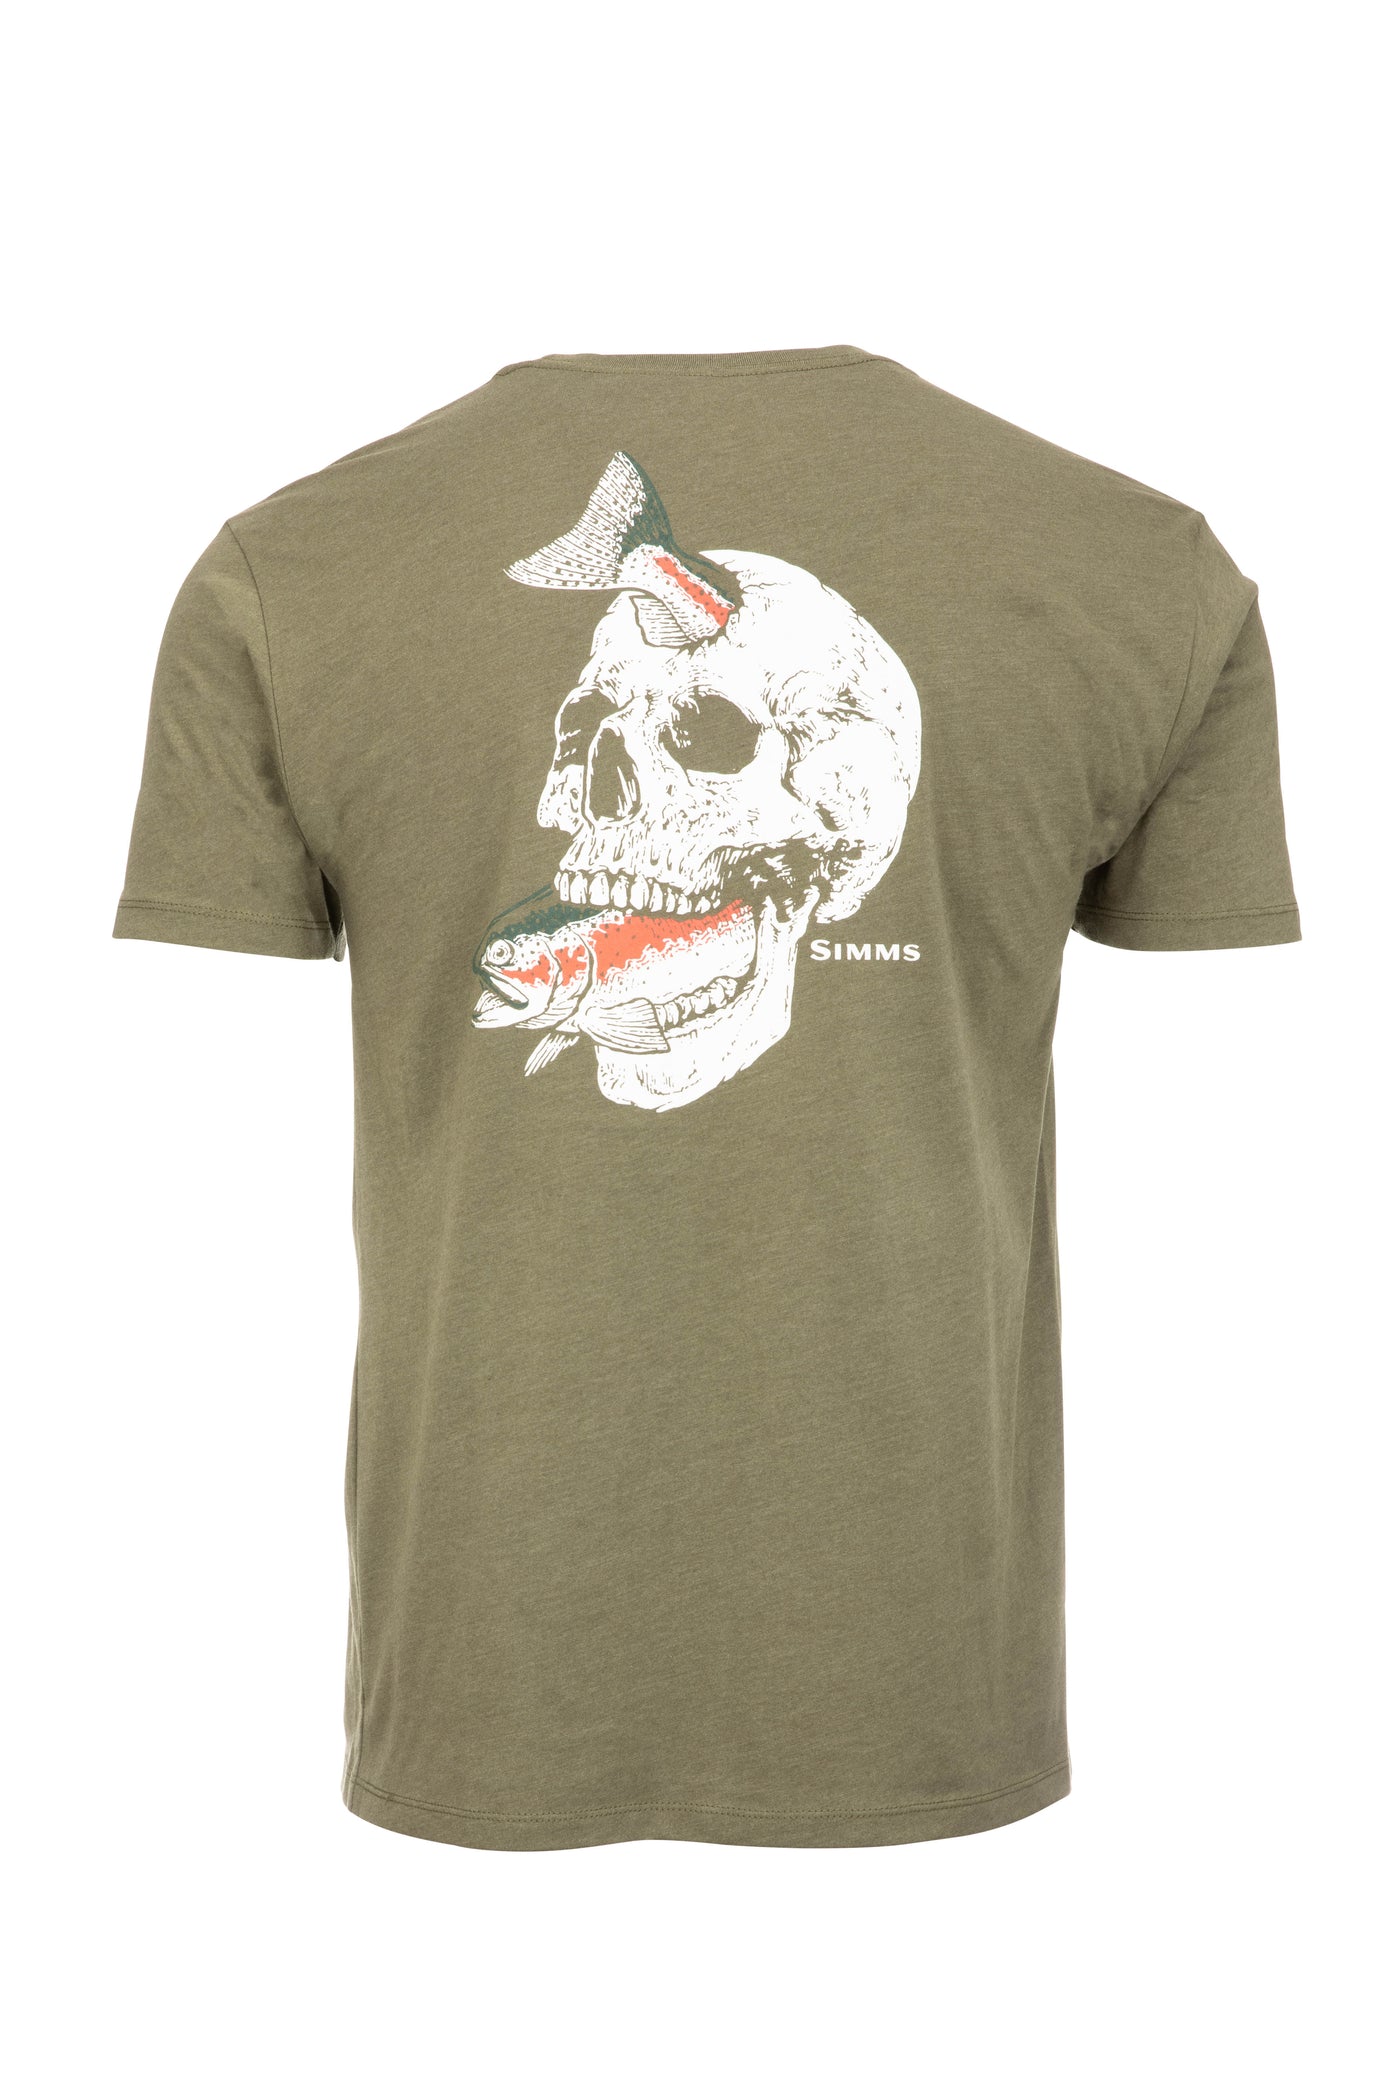 Simms Trout On My Mind T-Shirt Men's – Sea-Run Fly & Tackle